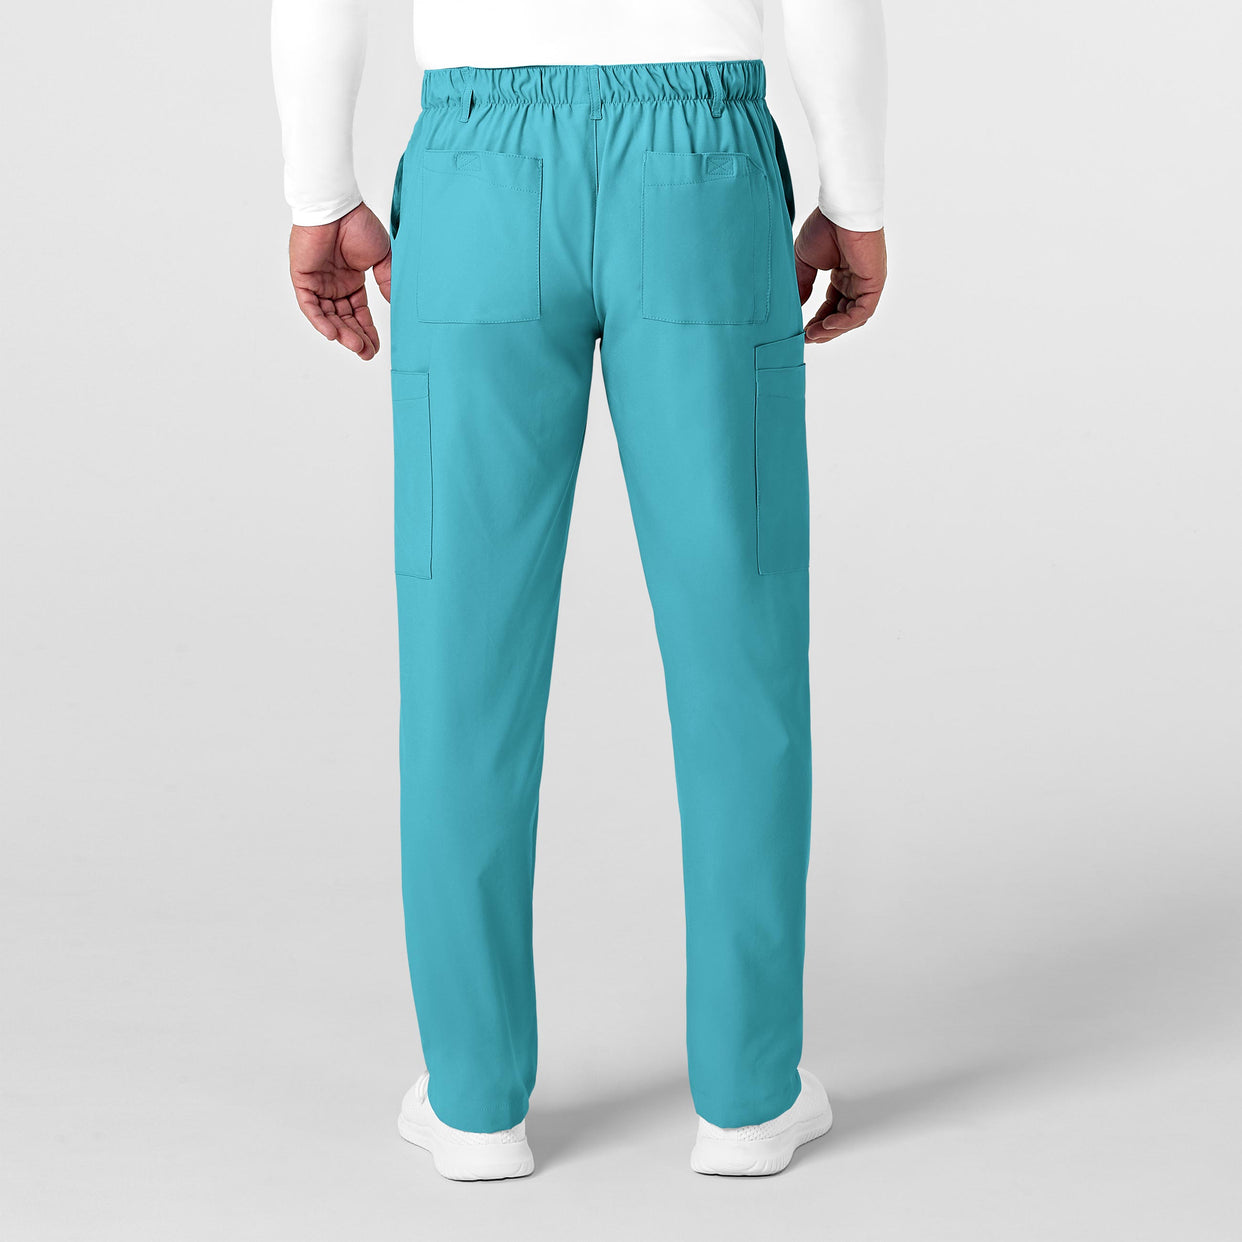 W123 Men's Flat Front Cargo Scrub Pant Teal Blue back view